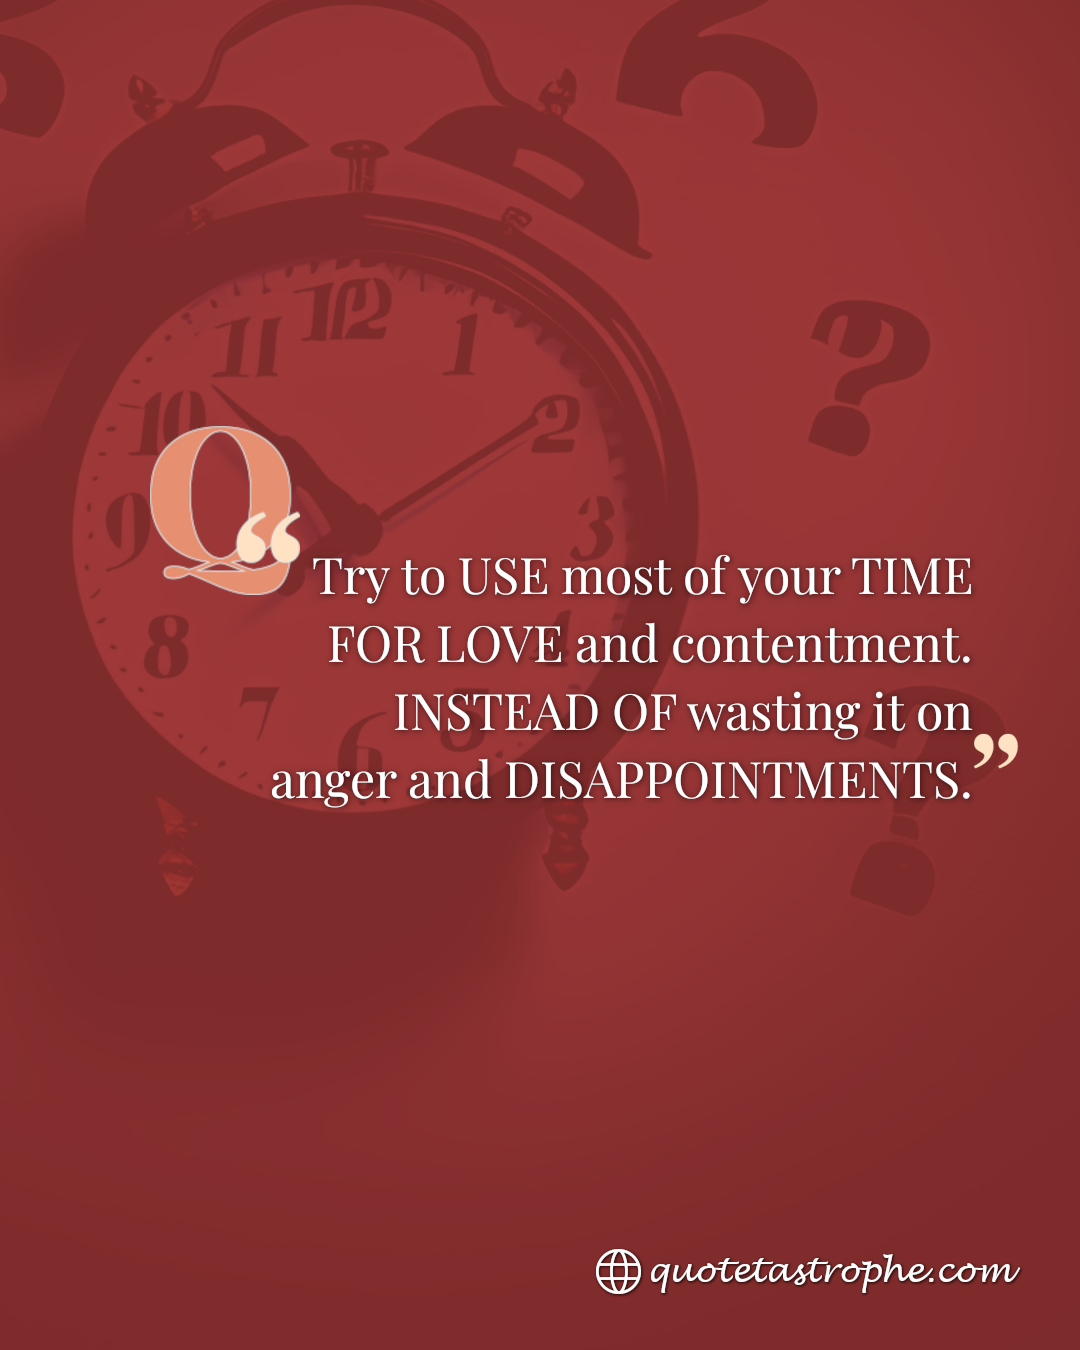 Use Most of Your Time for Love Instead of Disappointment